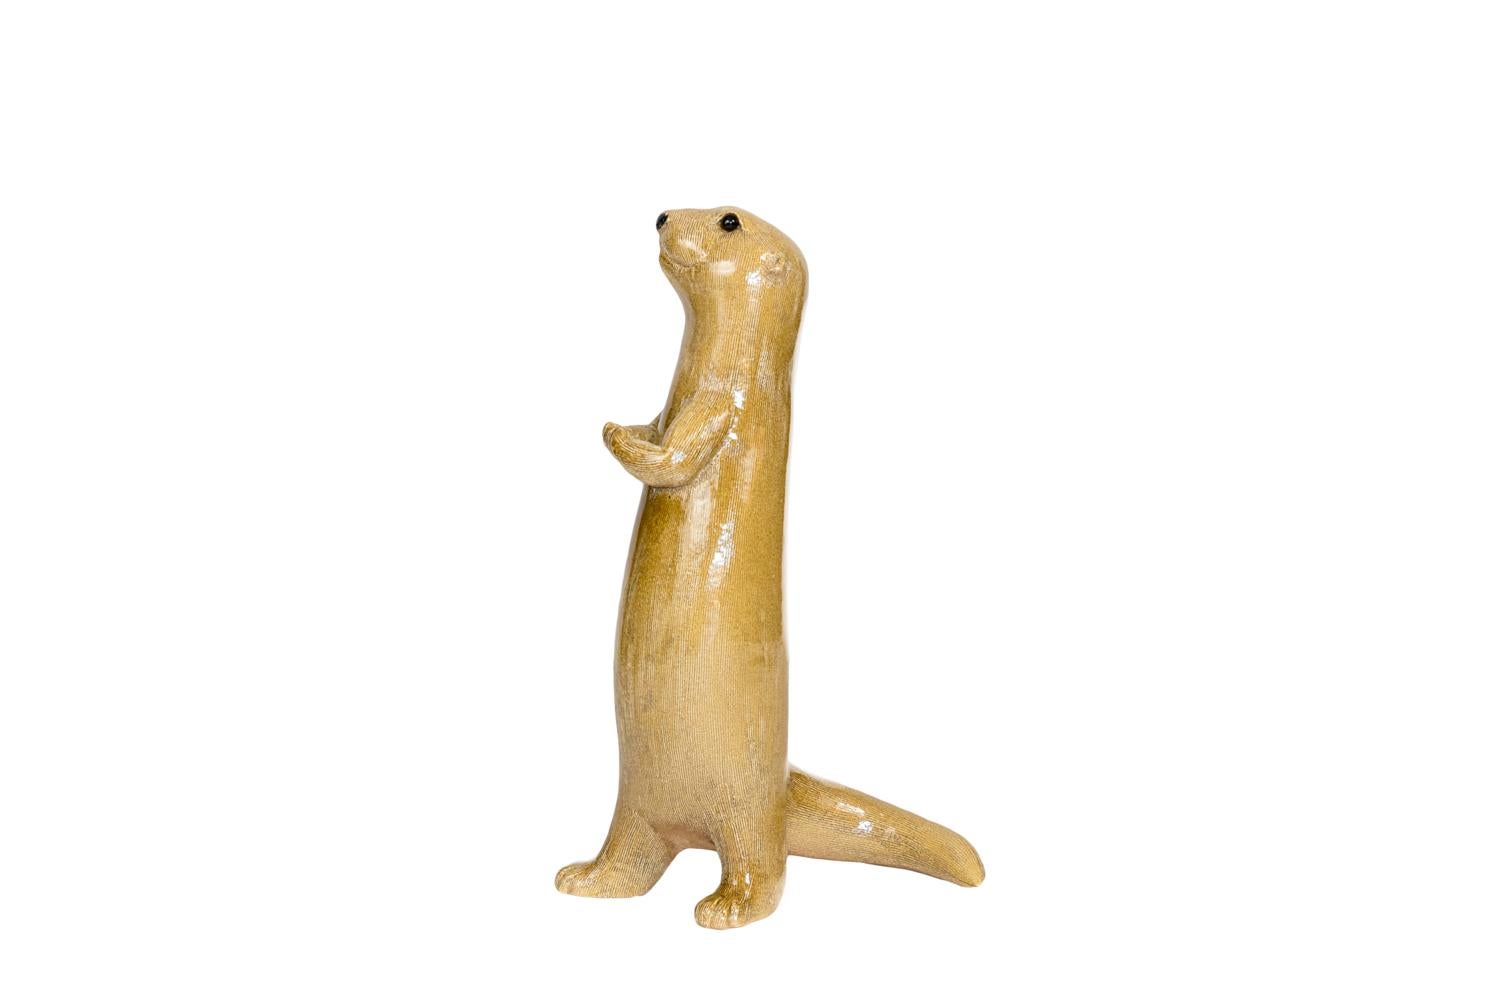 Valérie Courtet, signed.

Glazed stoneware sculpture figuring a stand otter on its back legs. Its tail slightly bent behind it. It holds its paws in front of its chest and slightly raised its head.

French contemporary work

Four other otters